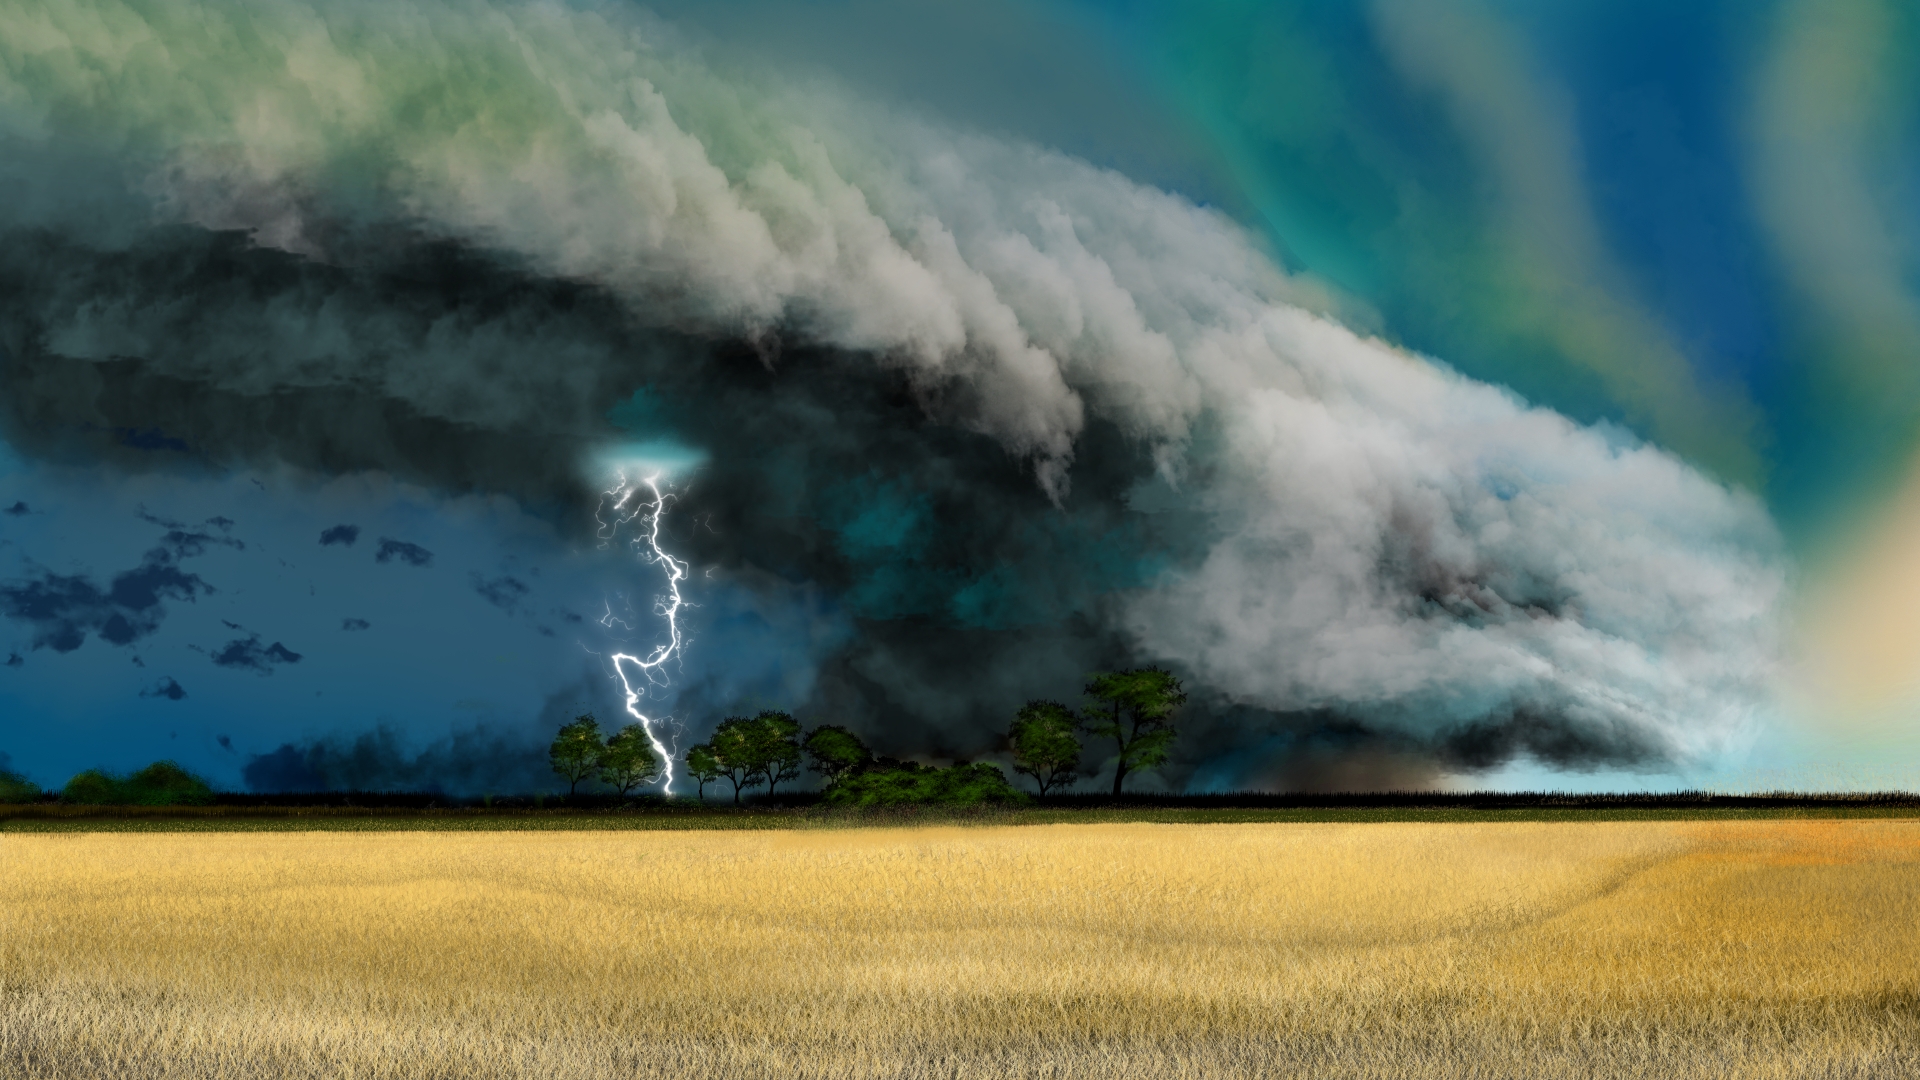 General 1920x1080 digital painting nature storm clouds